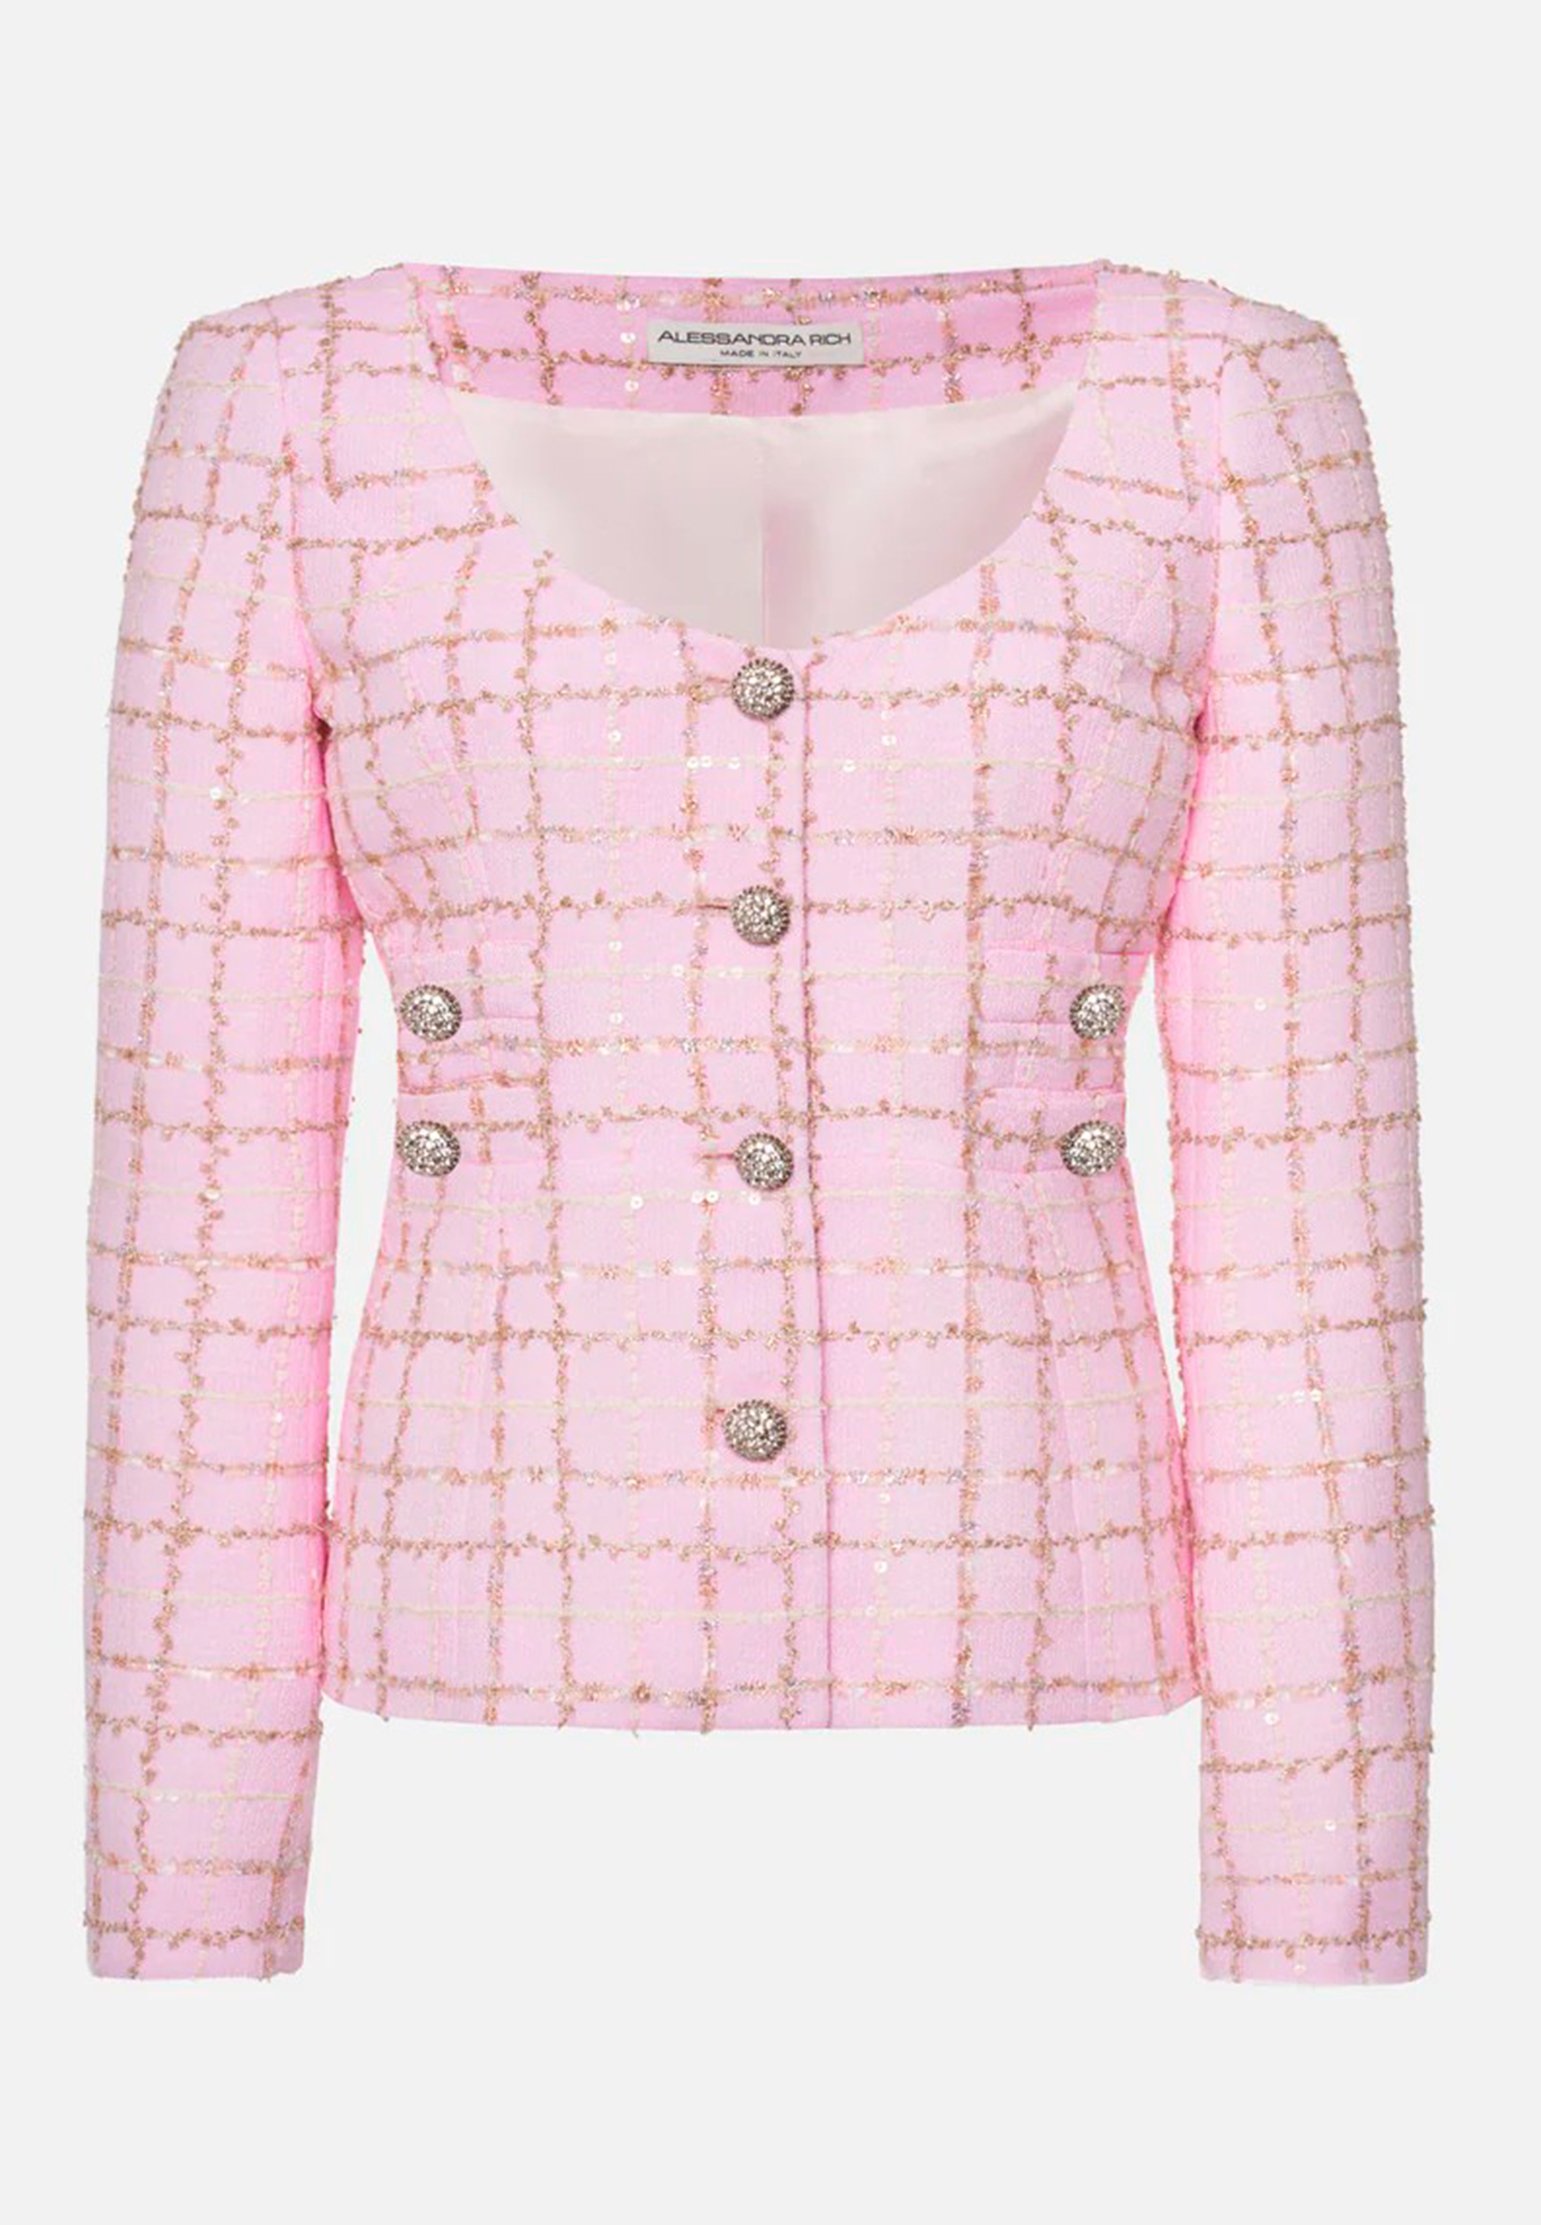 Jacket ALESSANDRA RICH Color: pink (Code: 3757) in online store Allure